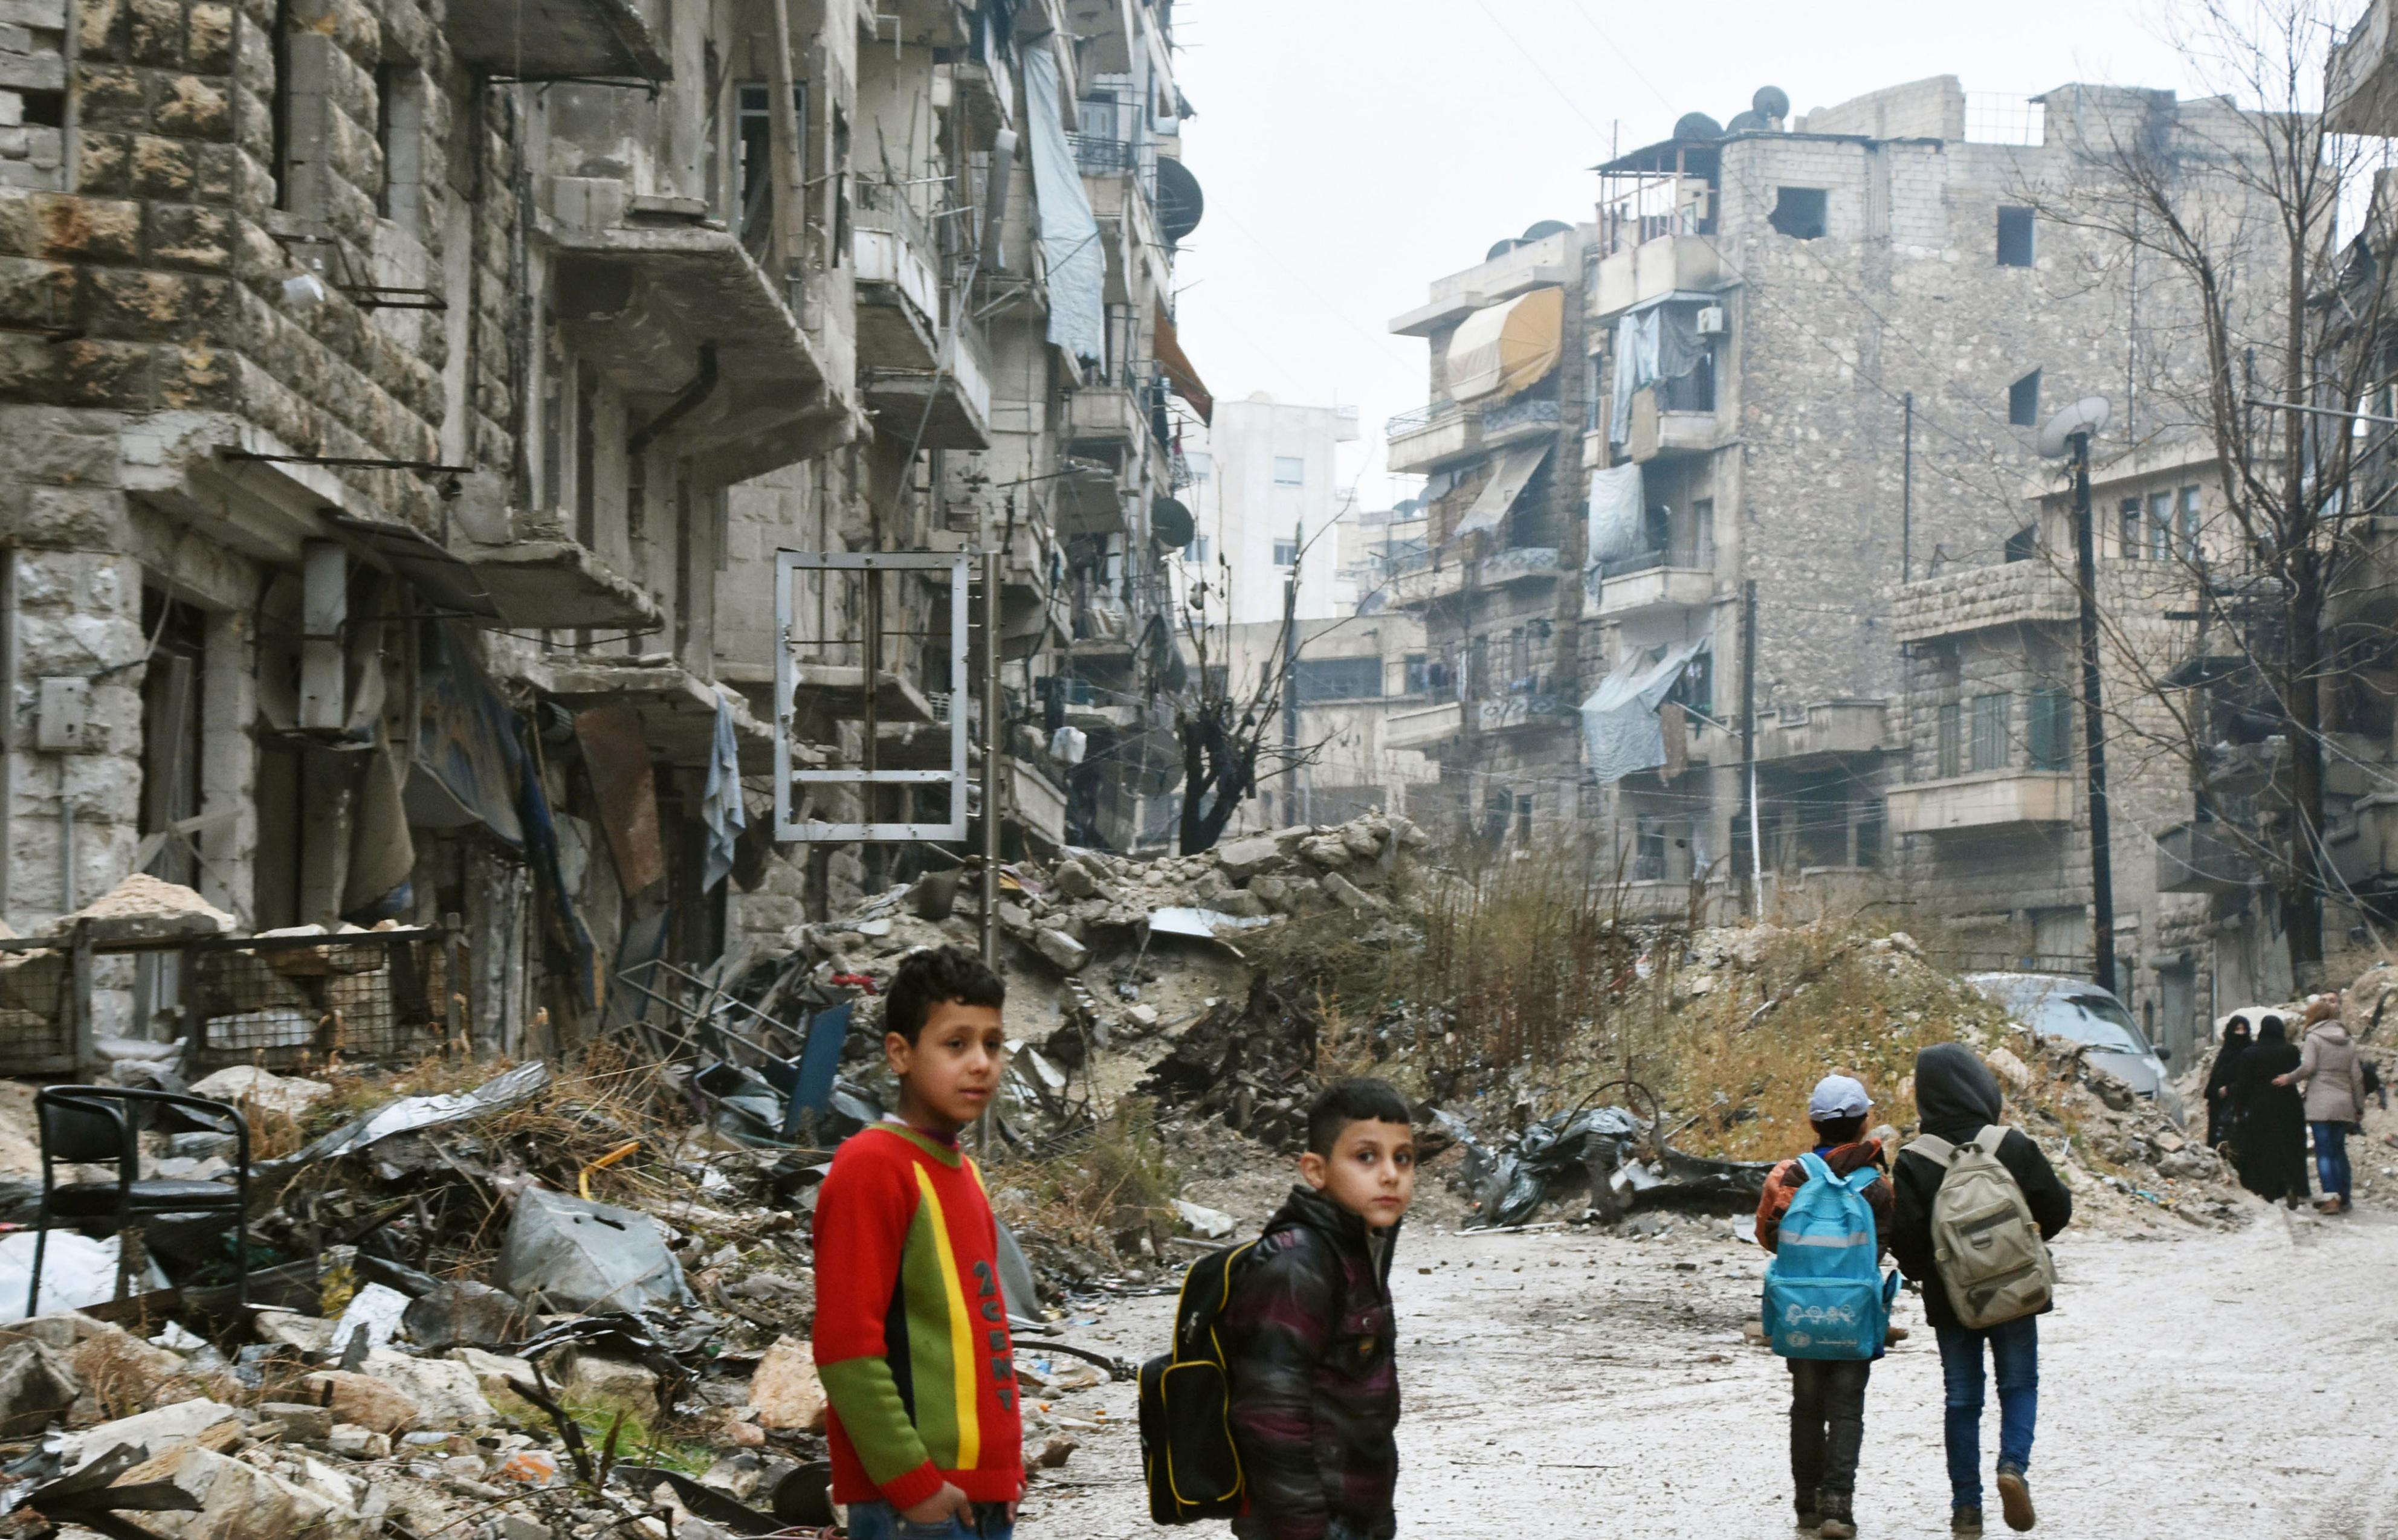 Children walk in a devastated area in the northern Syria city of Aleppo on Dec. 13, 2016, as troops loyal to the government of President Bashar al-Assad seemed poised to take complete control of the city that had been ruled by rebels. (Kyodo) (Kyodo—Kyodo)